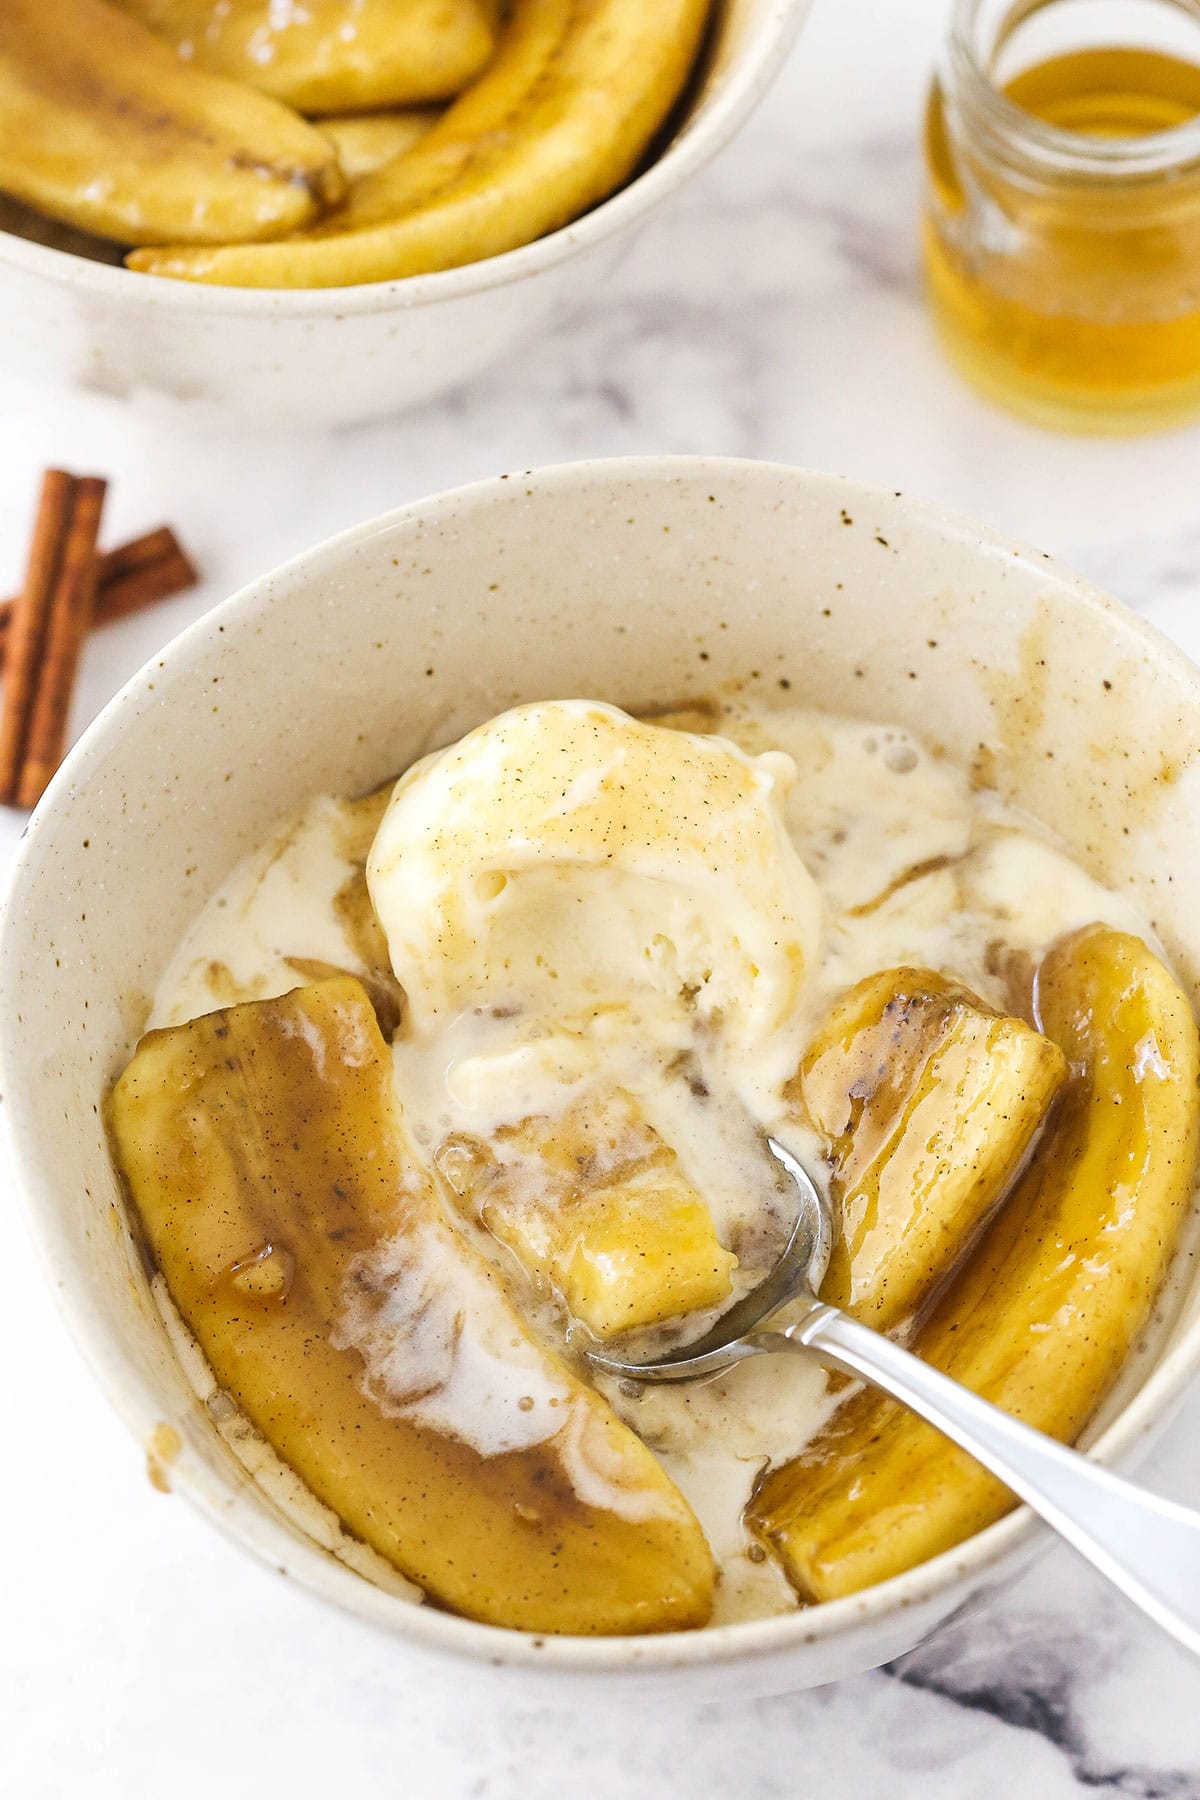 Bananas foster in a speckled bowl over a melty scoop of ice cream